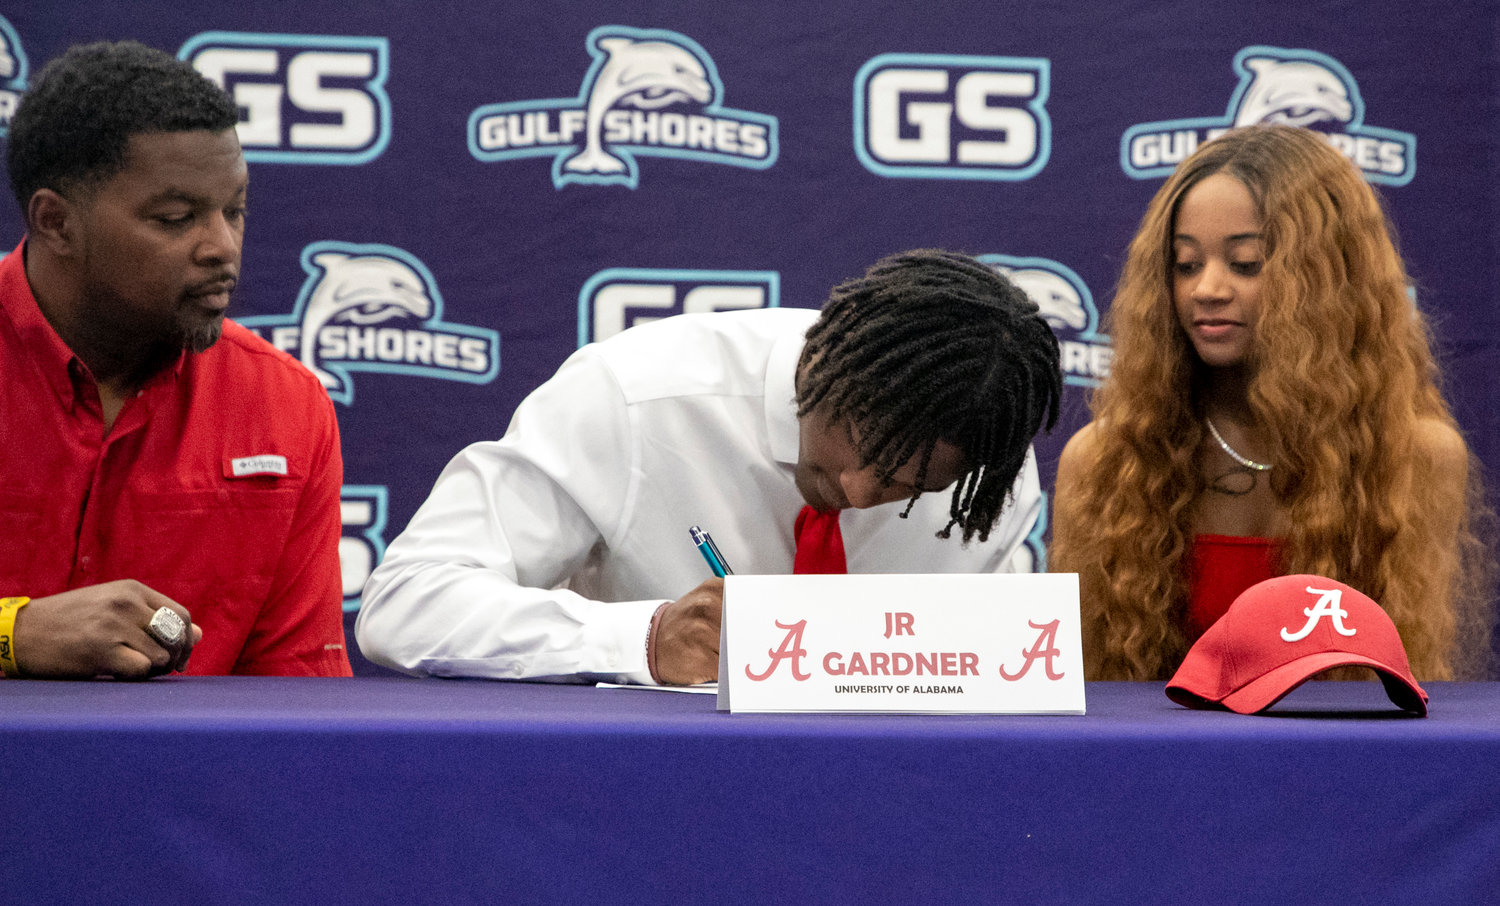 J.R. Gardner accepted a preferred walk-on offer to the University of Alabama and signed his National Letter of Intent Wednesday, Feb. 1, during a ceremony at Gulf Shores High School. Gardner joined the National Signing Day celebrations and was one of five from the Dolphins’ 11-win, state quarterfinal team to sign with colleges Wednesday.